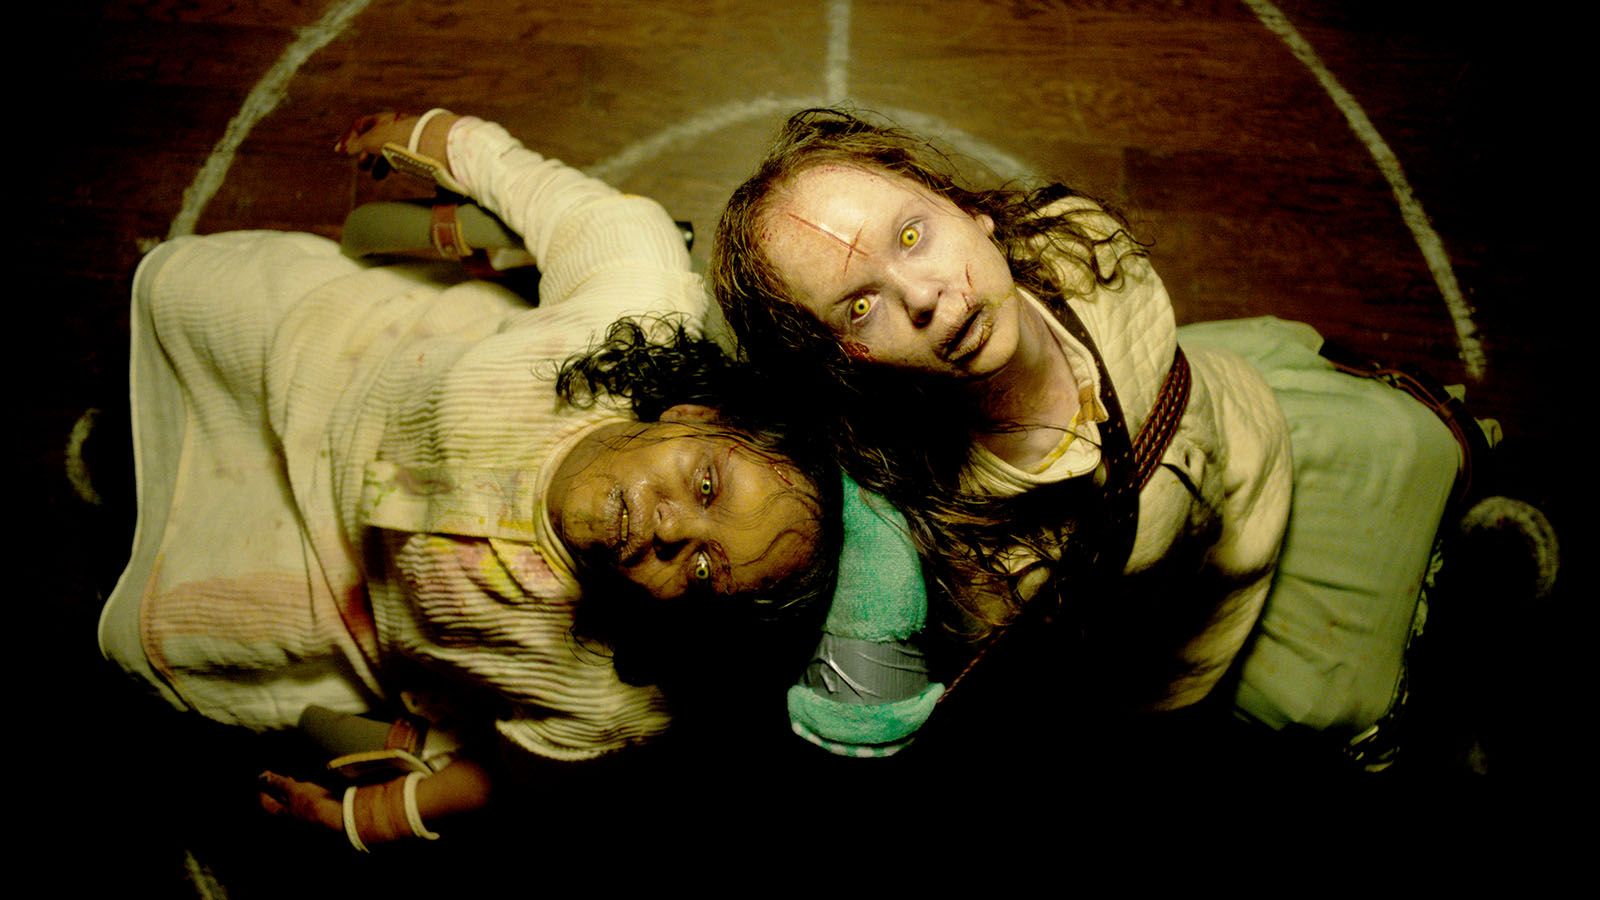 Lidya Jewett, left, and Olivia O’Neill star in the new horror film The Exorcist: Believer.